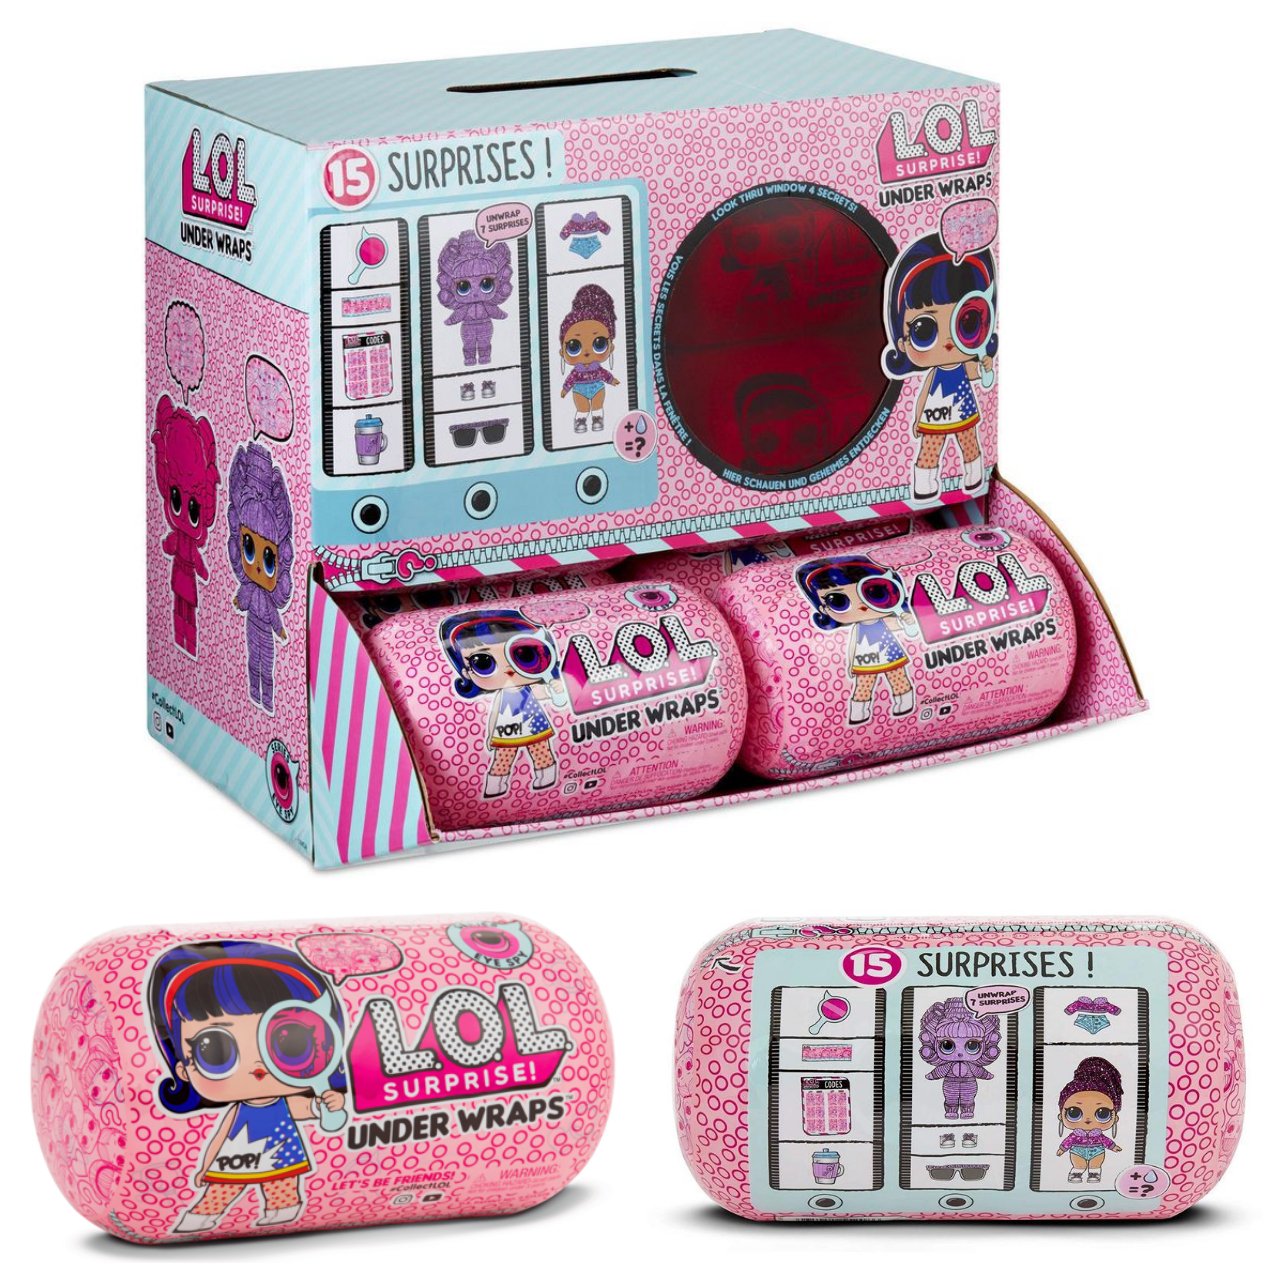 Series Eye Spy LOL Surprise 15 Layers Under Wraps S4 Doll Capsules Case